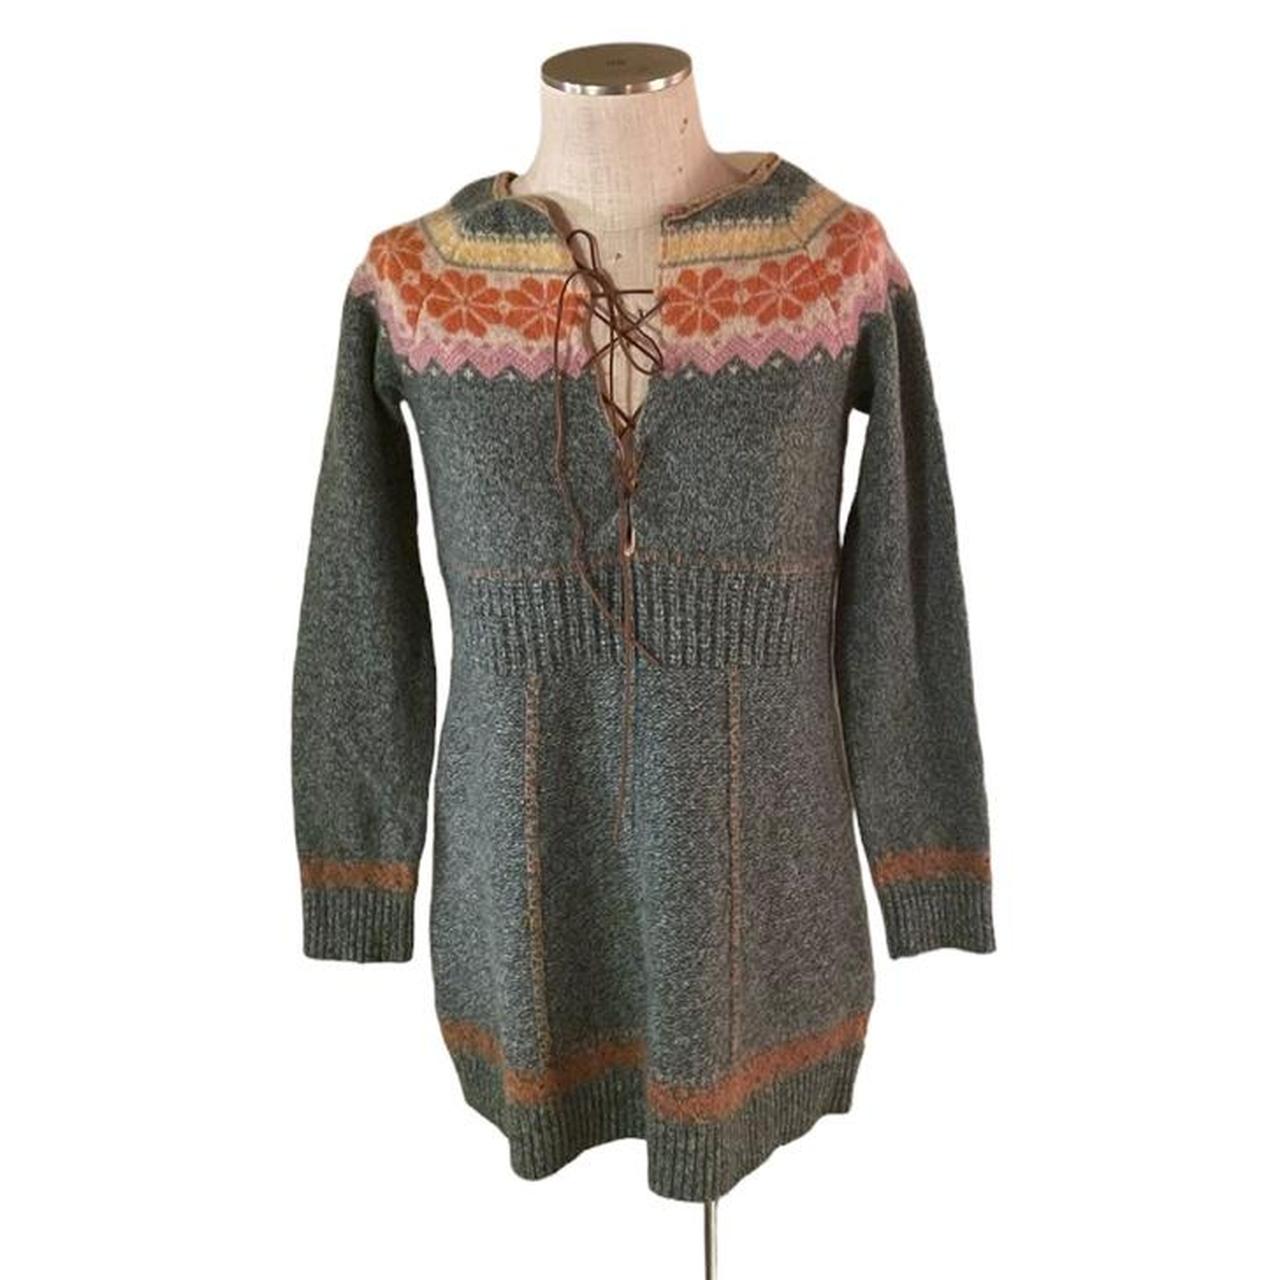 Really comfy and beautiful free people fair isle - Depop